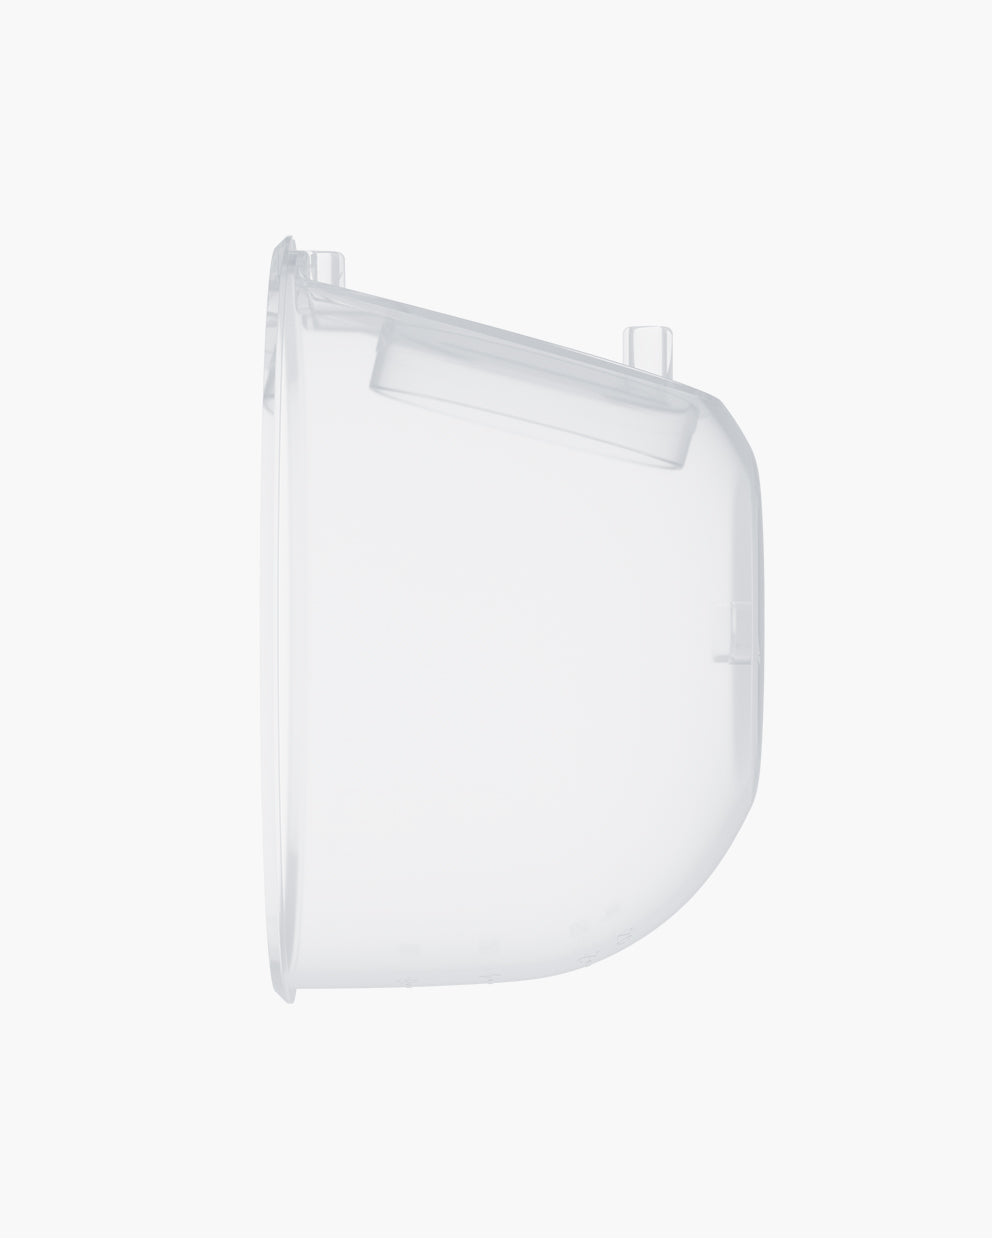 S12 Pro Breast Pump Replacement Parts